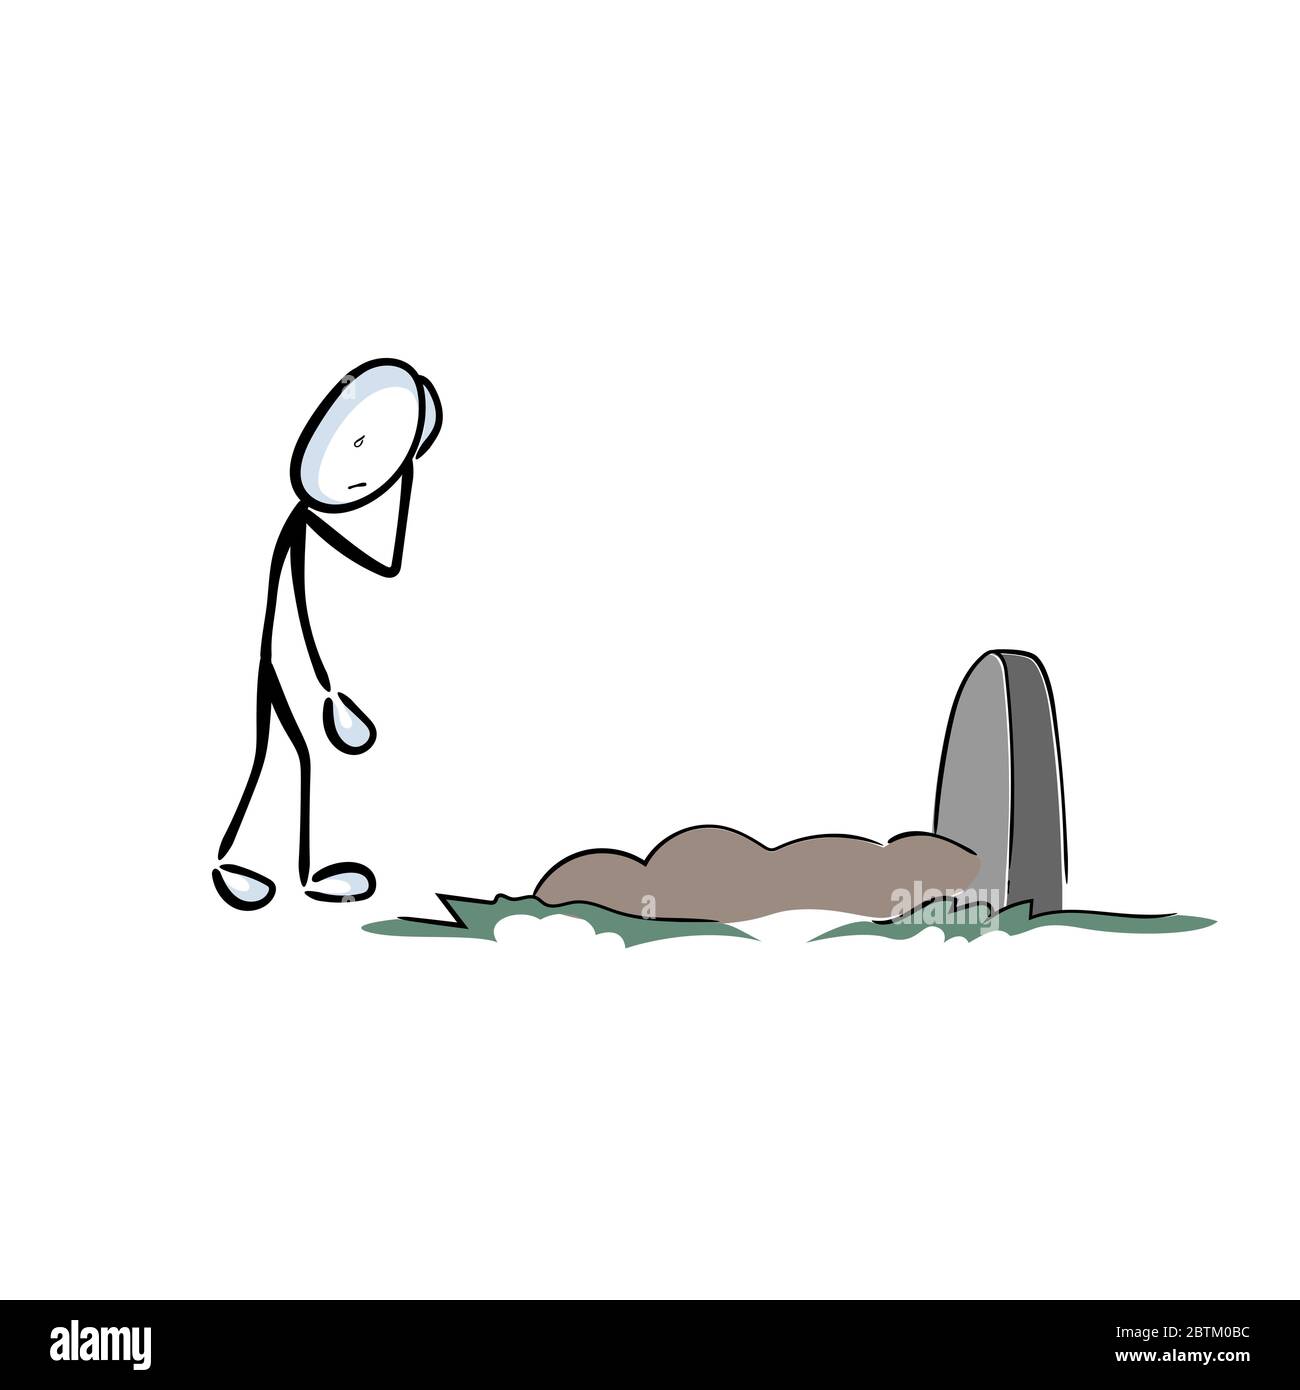 Burial on the graveyard, cemetery. Visiting grave for remembrance. RIP. Hand drawn. Stickman cartoon. Doodle sketch, Vector graphic illustration Stock Vector